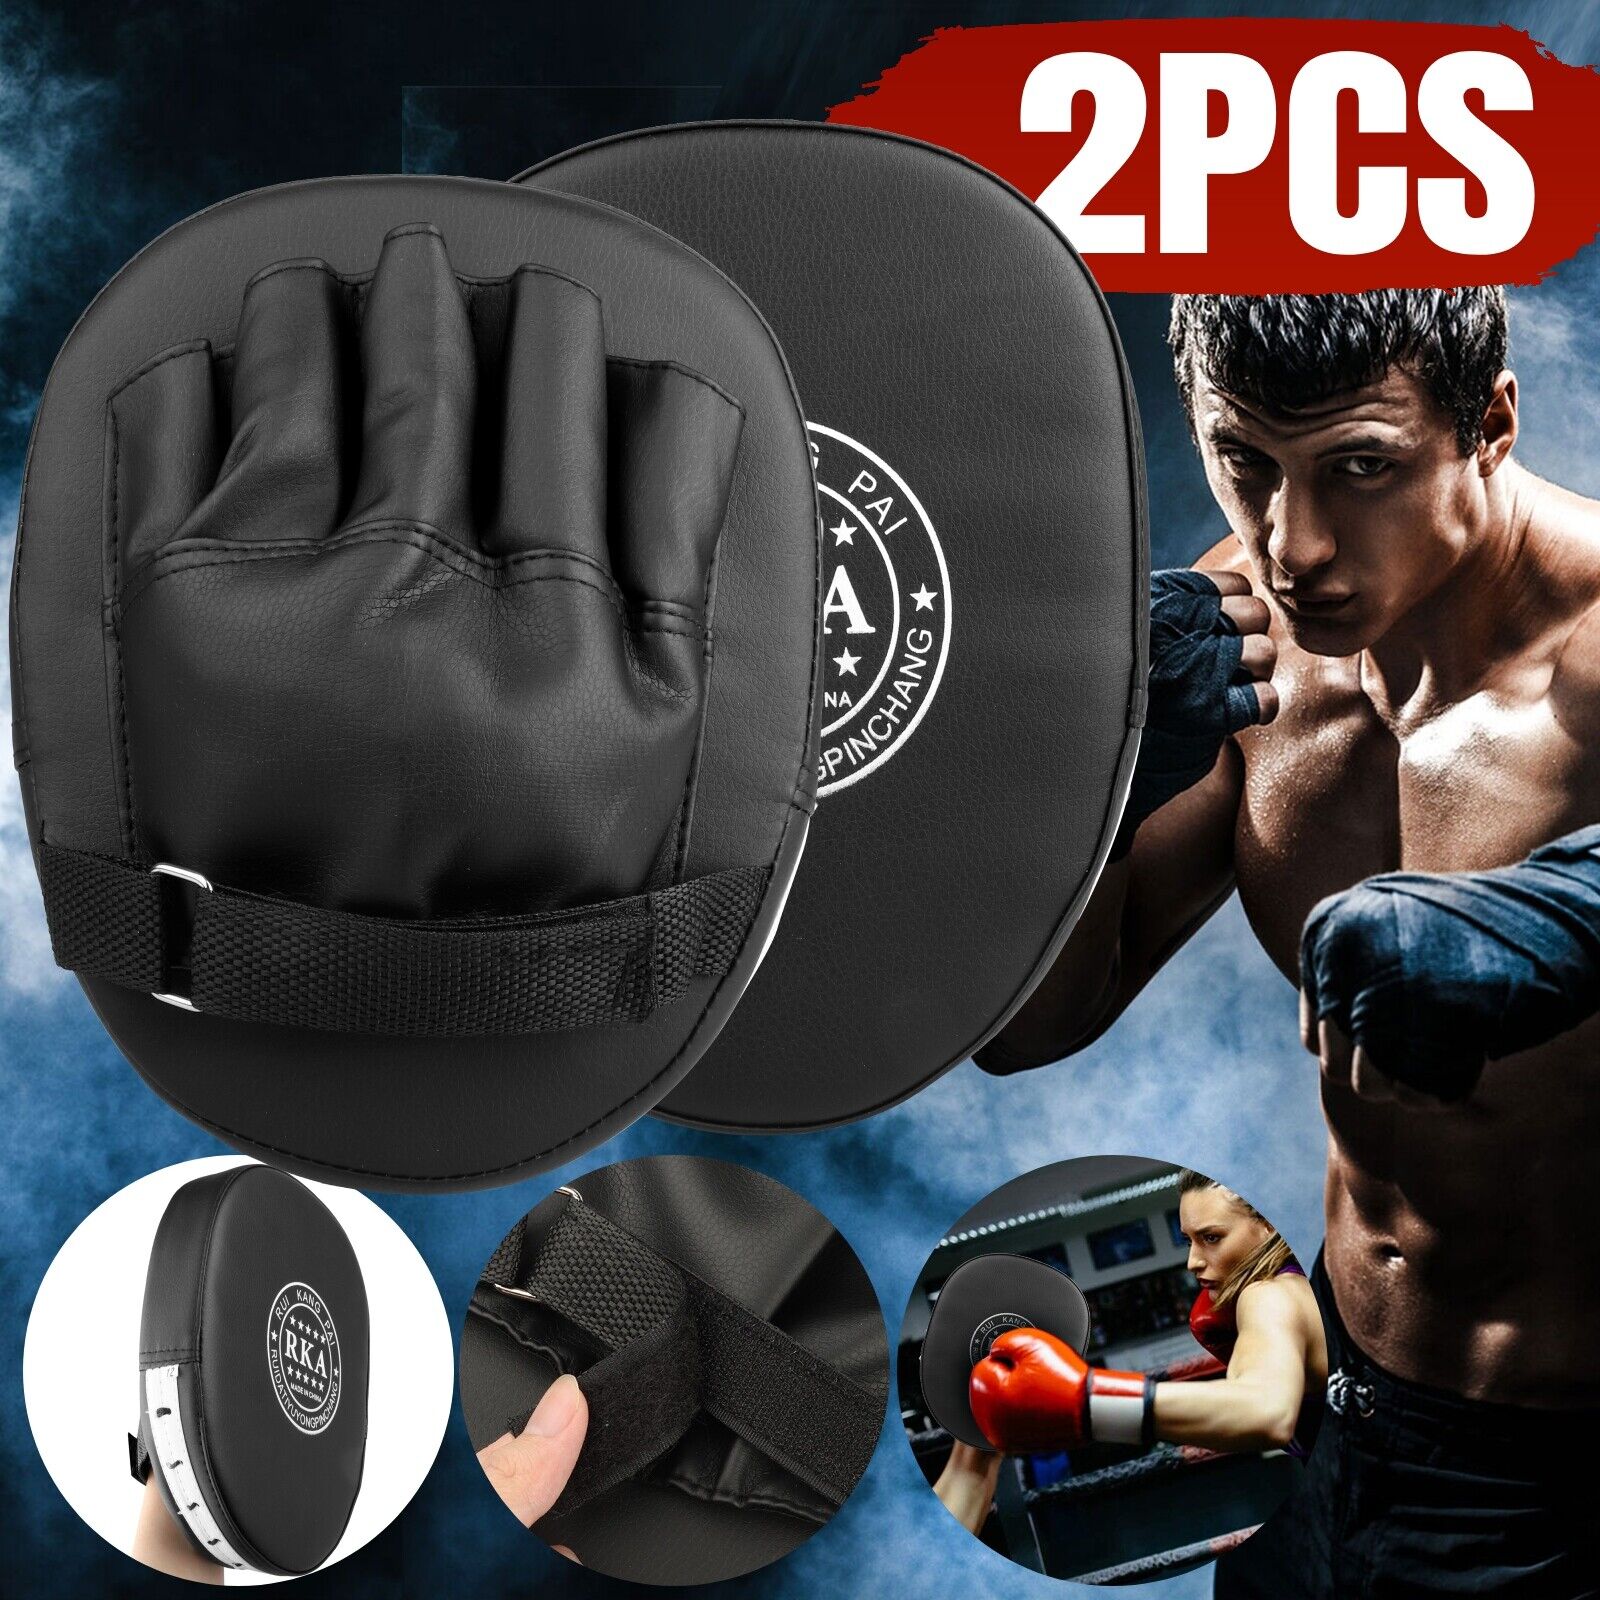 Great Choice Products 2Pcs Mma Boxing Punching Mitts Sparring Gloves Kick Target Focus Training Pads